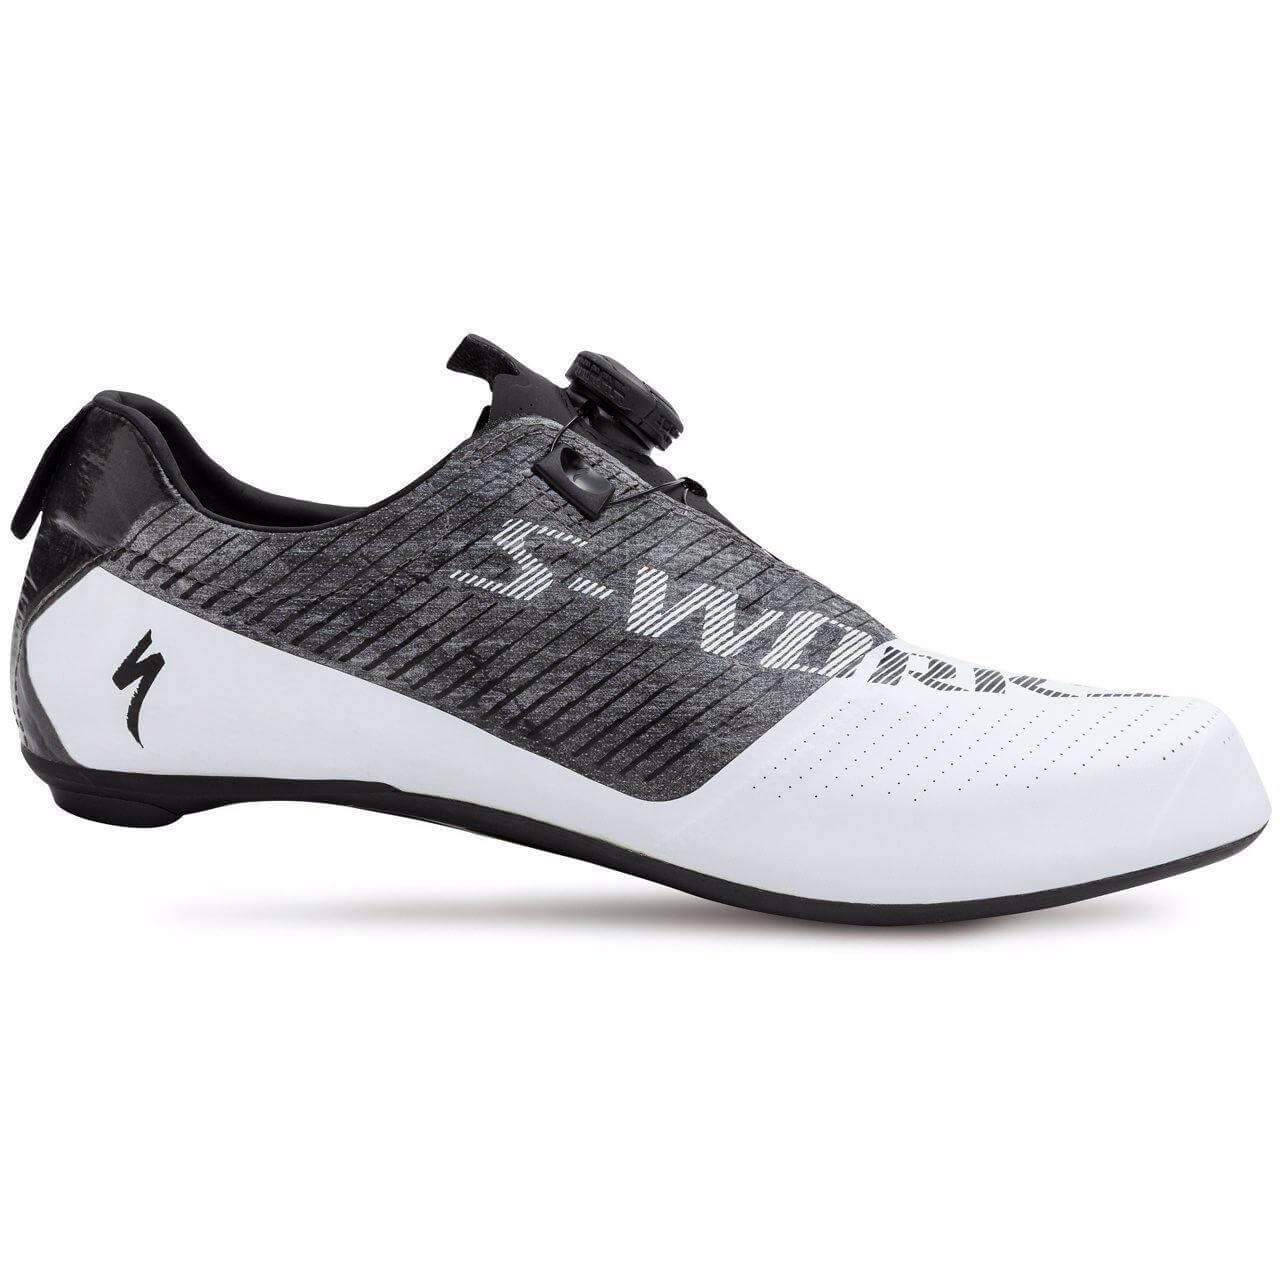 S-Works EXOS Road Shoe | Strictly Bicycles – Strictly Bicycles